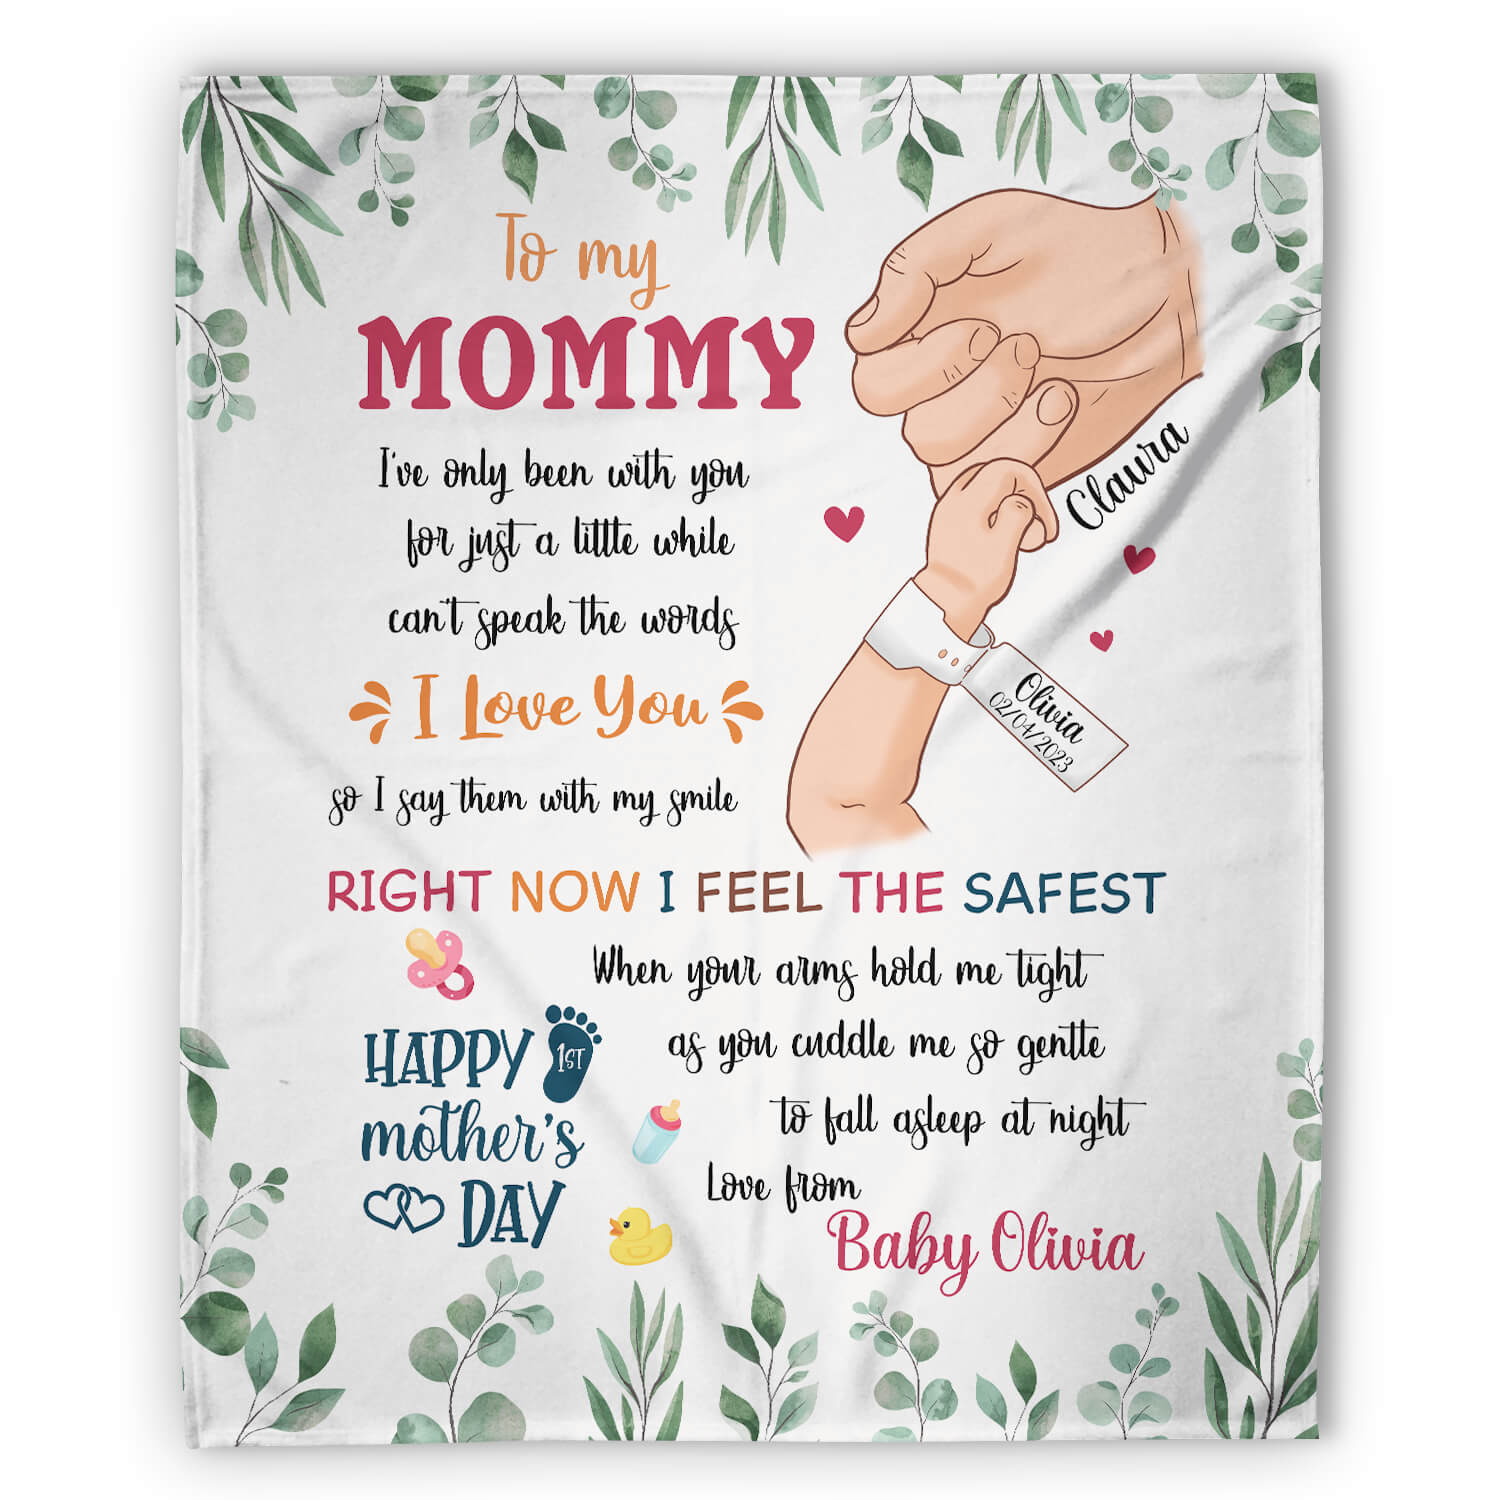 Happy 1st Mother's Day - Personalized Mother's Day gift for New Mom - Custom Blanket - MyMindfulGifts